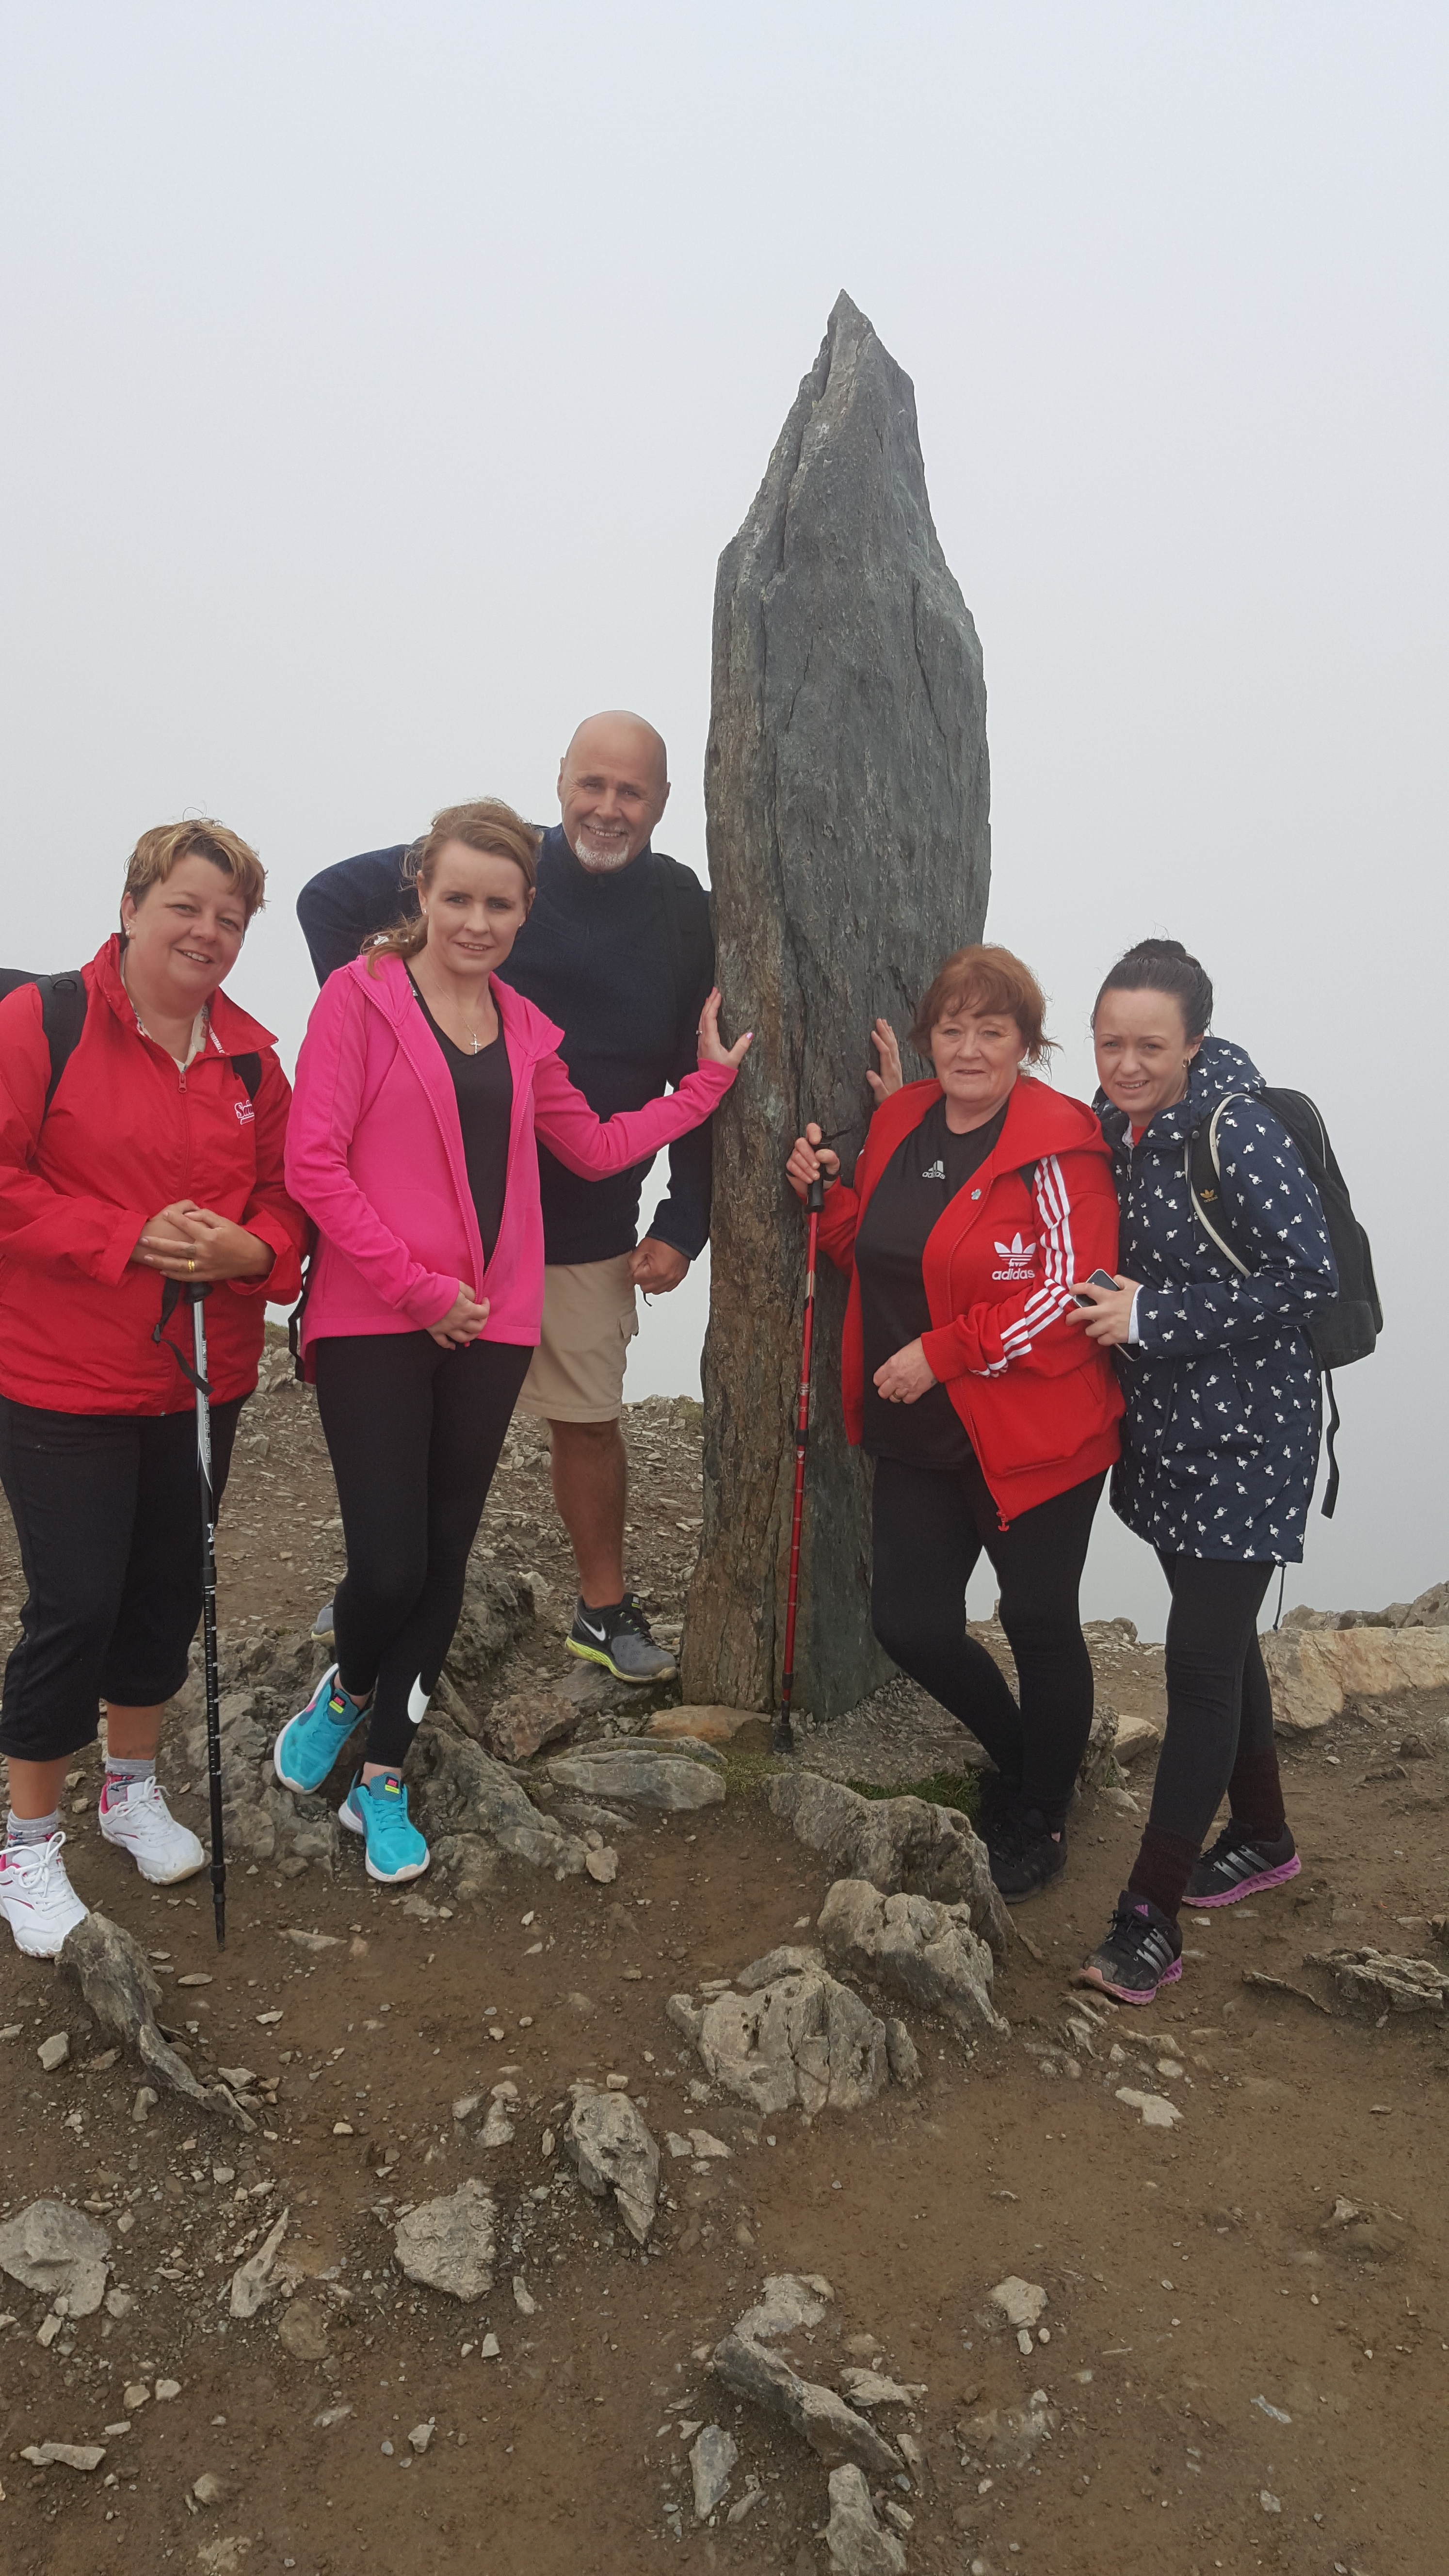 Elizabeth Court Care Centre Staff climb Snowdon: Key Healthcare is dedicated to caring for elderly residents in safe. We have multiple dementia care homes including our care home middlesbrough, our care home St. Helen and care home saltburn. We excel in monitoring and improving care levels.